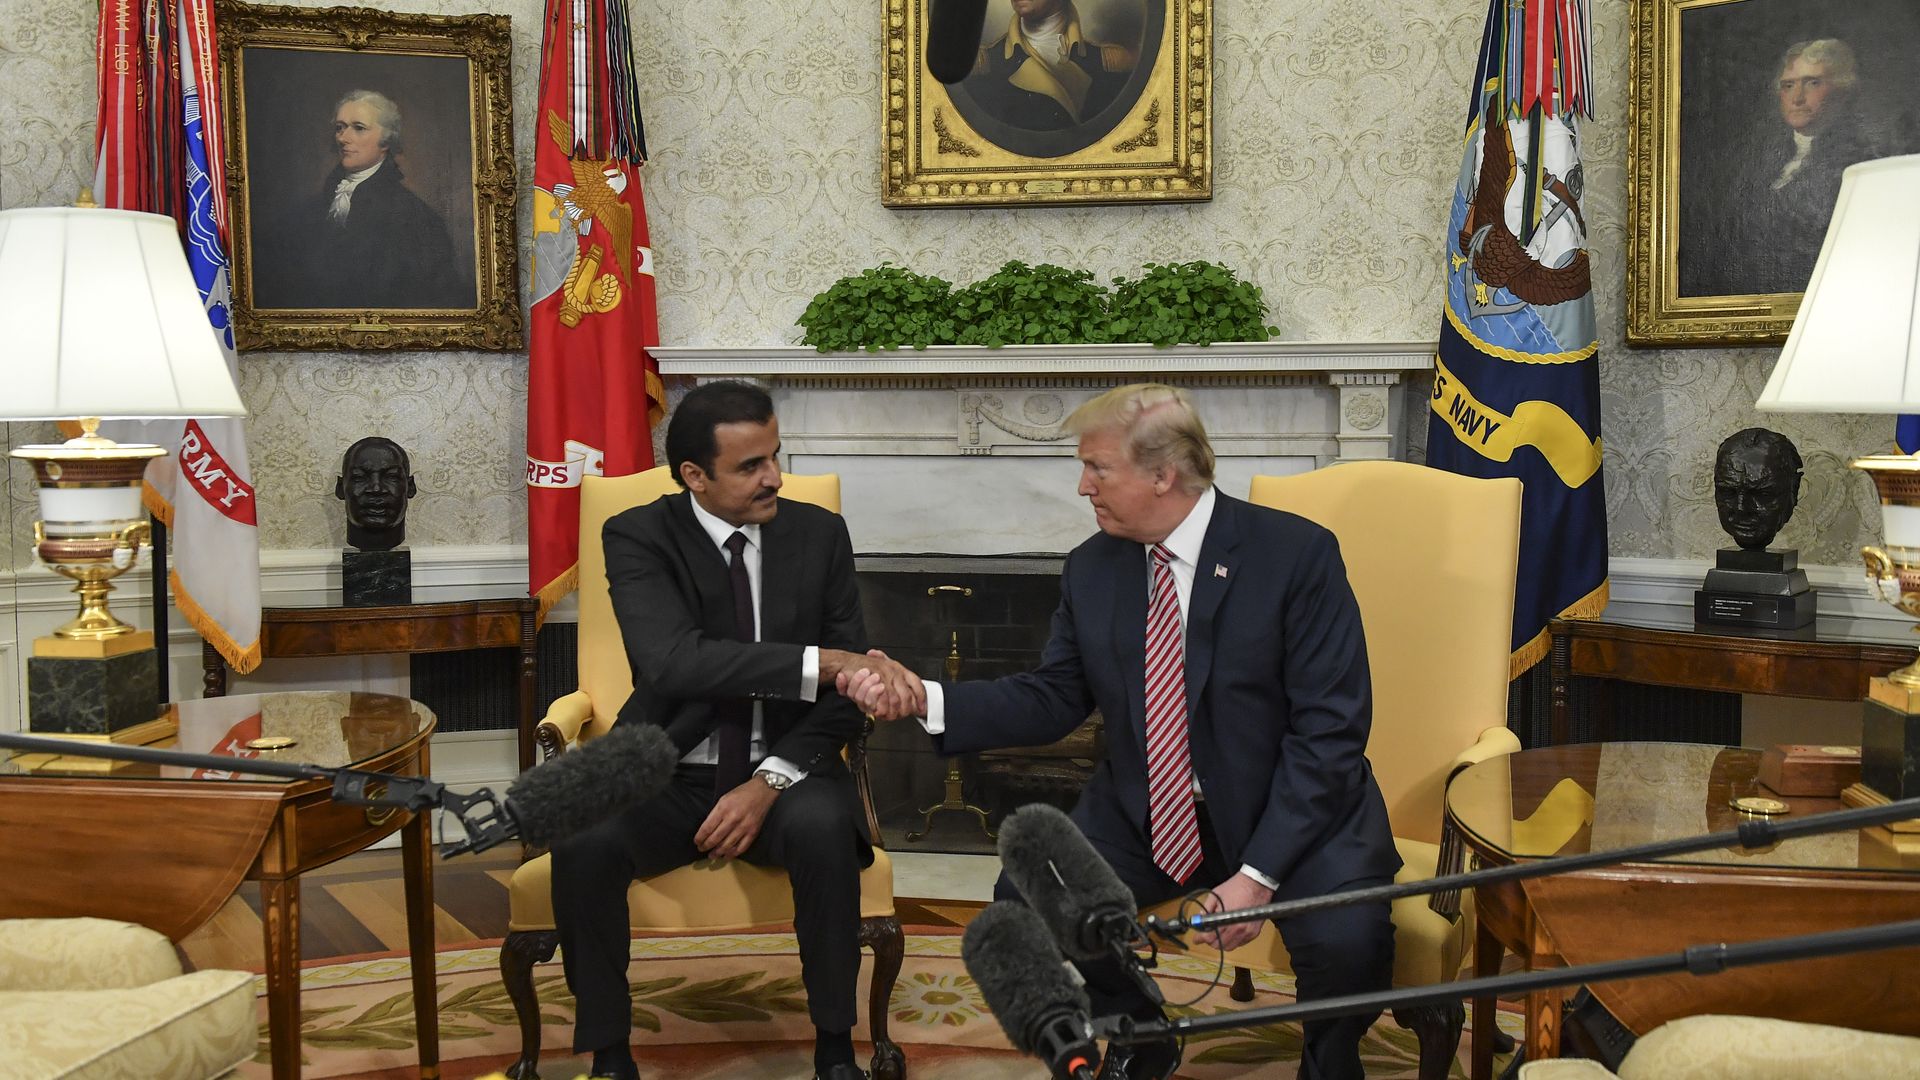 President Trump welcomed the Emir of Qatar to the White House on Tuesday.